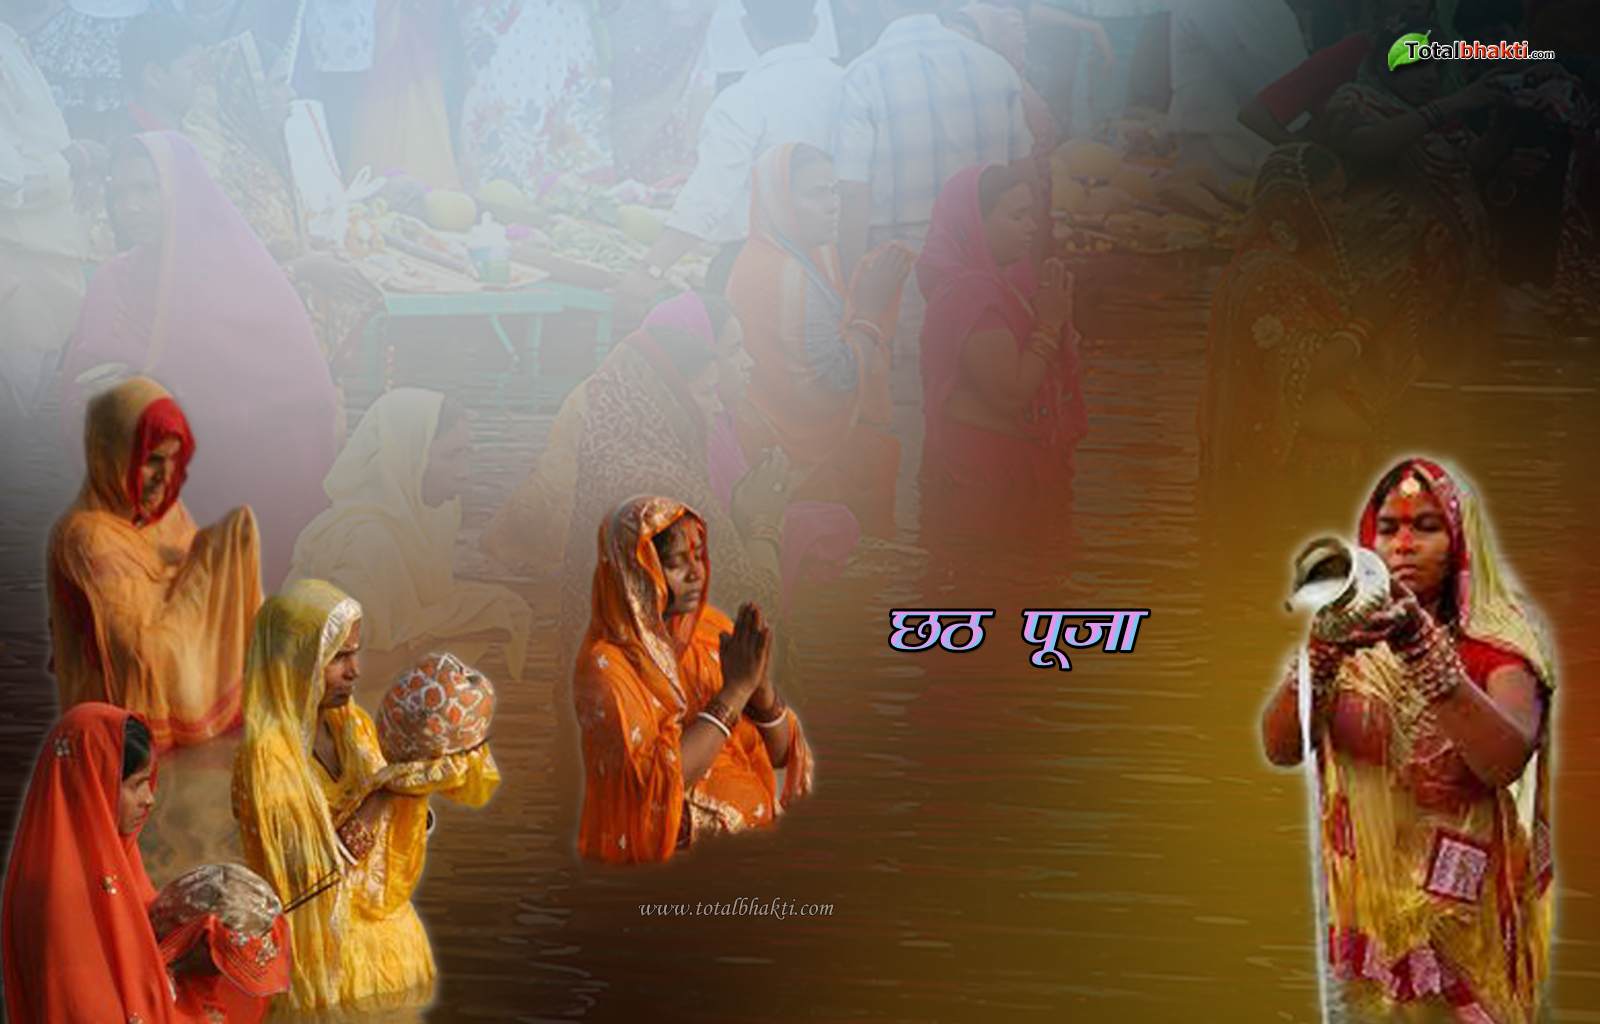 ... , Chhath puja songs mp3, chhath puja songs vide | Galerry Wallpaper